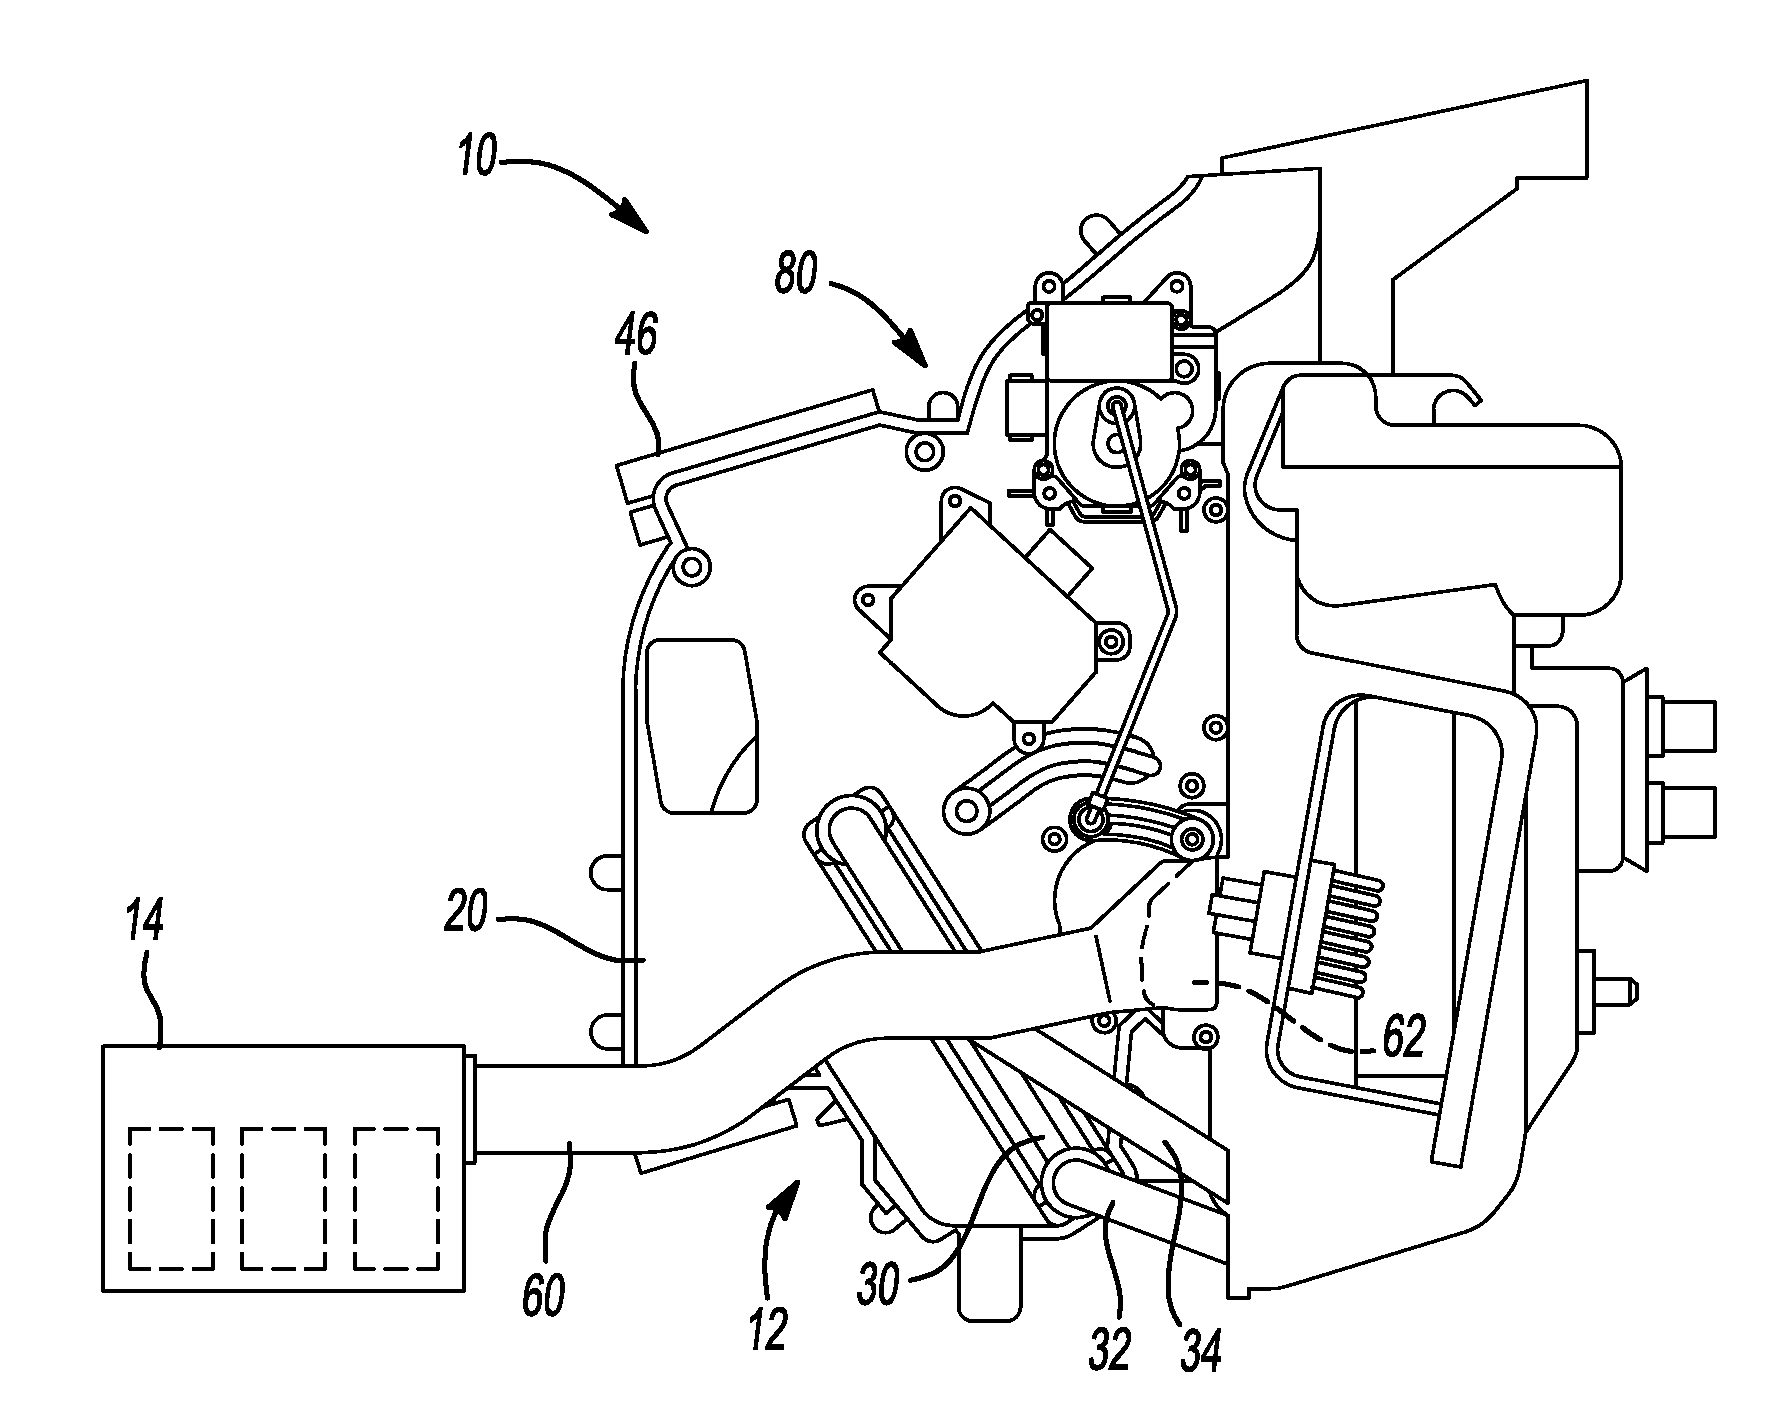 Heating, ventilating and air-conditioning apparatus